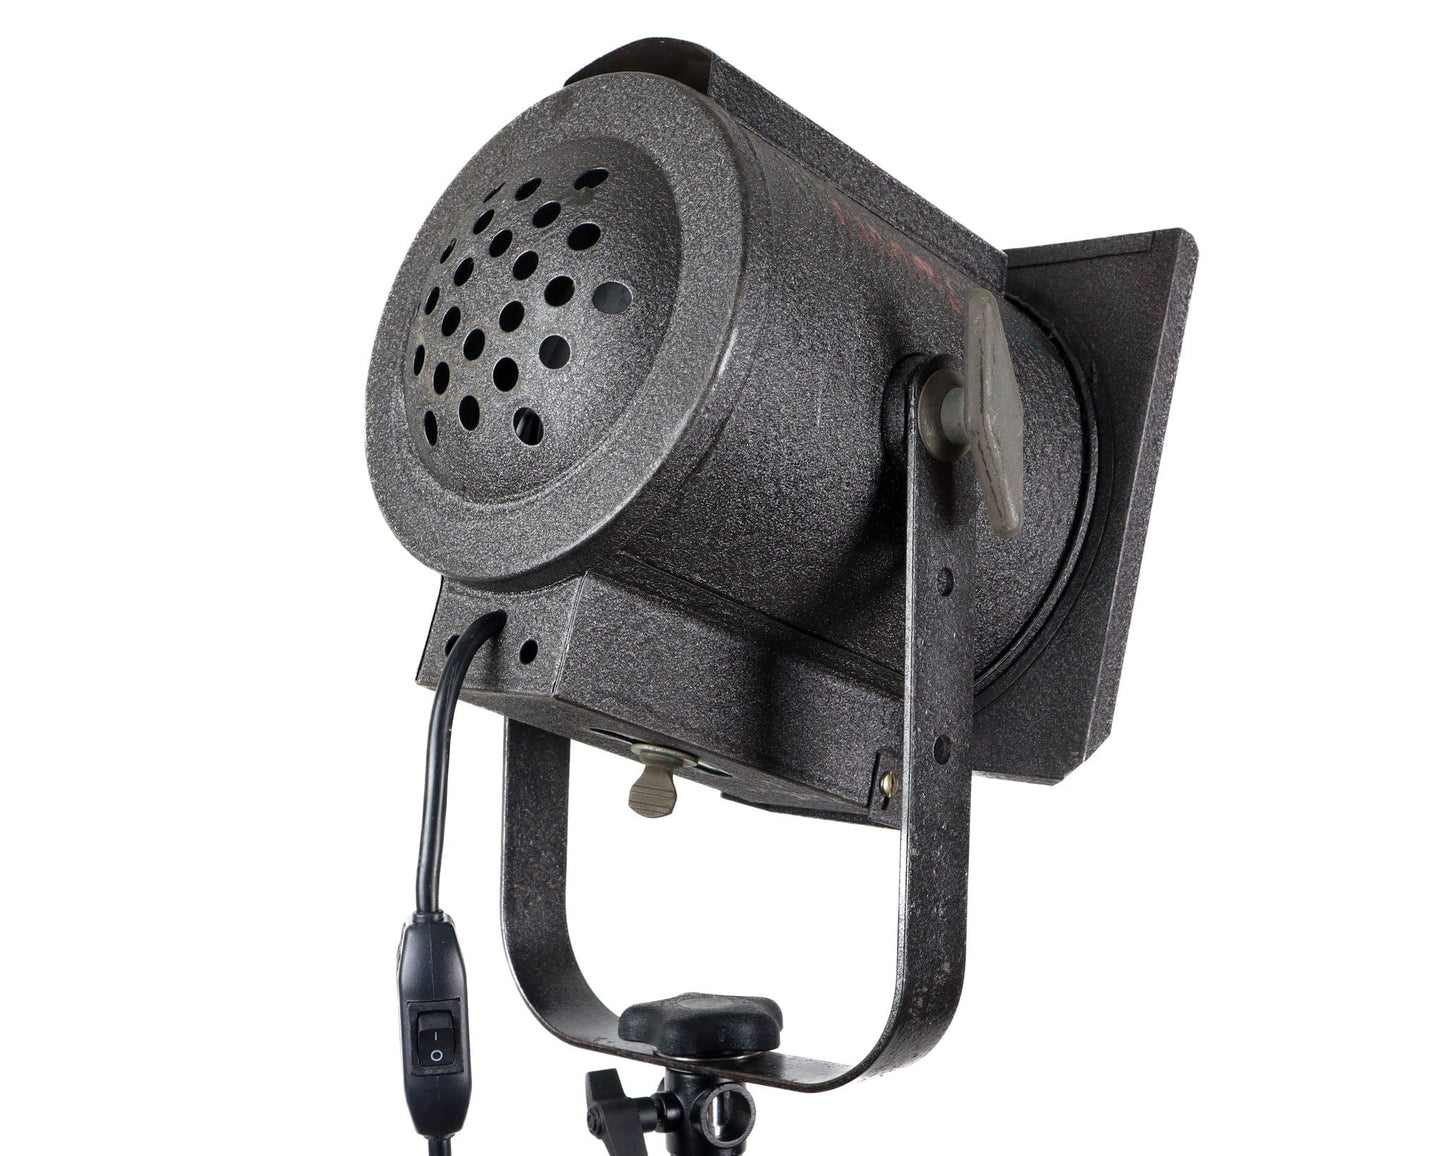 LightAndTimeArt Flood & Spot Lights Small, Dark Gray Stage light with Colored Lenses, Home Theater & Movie Room Decor